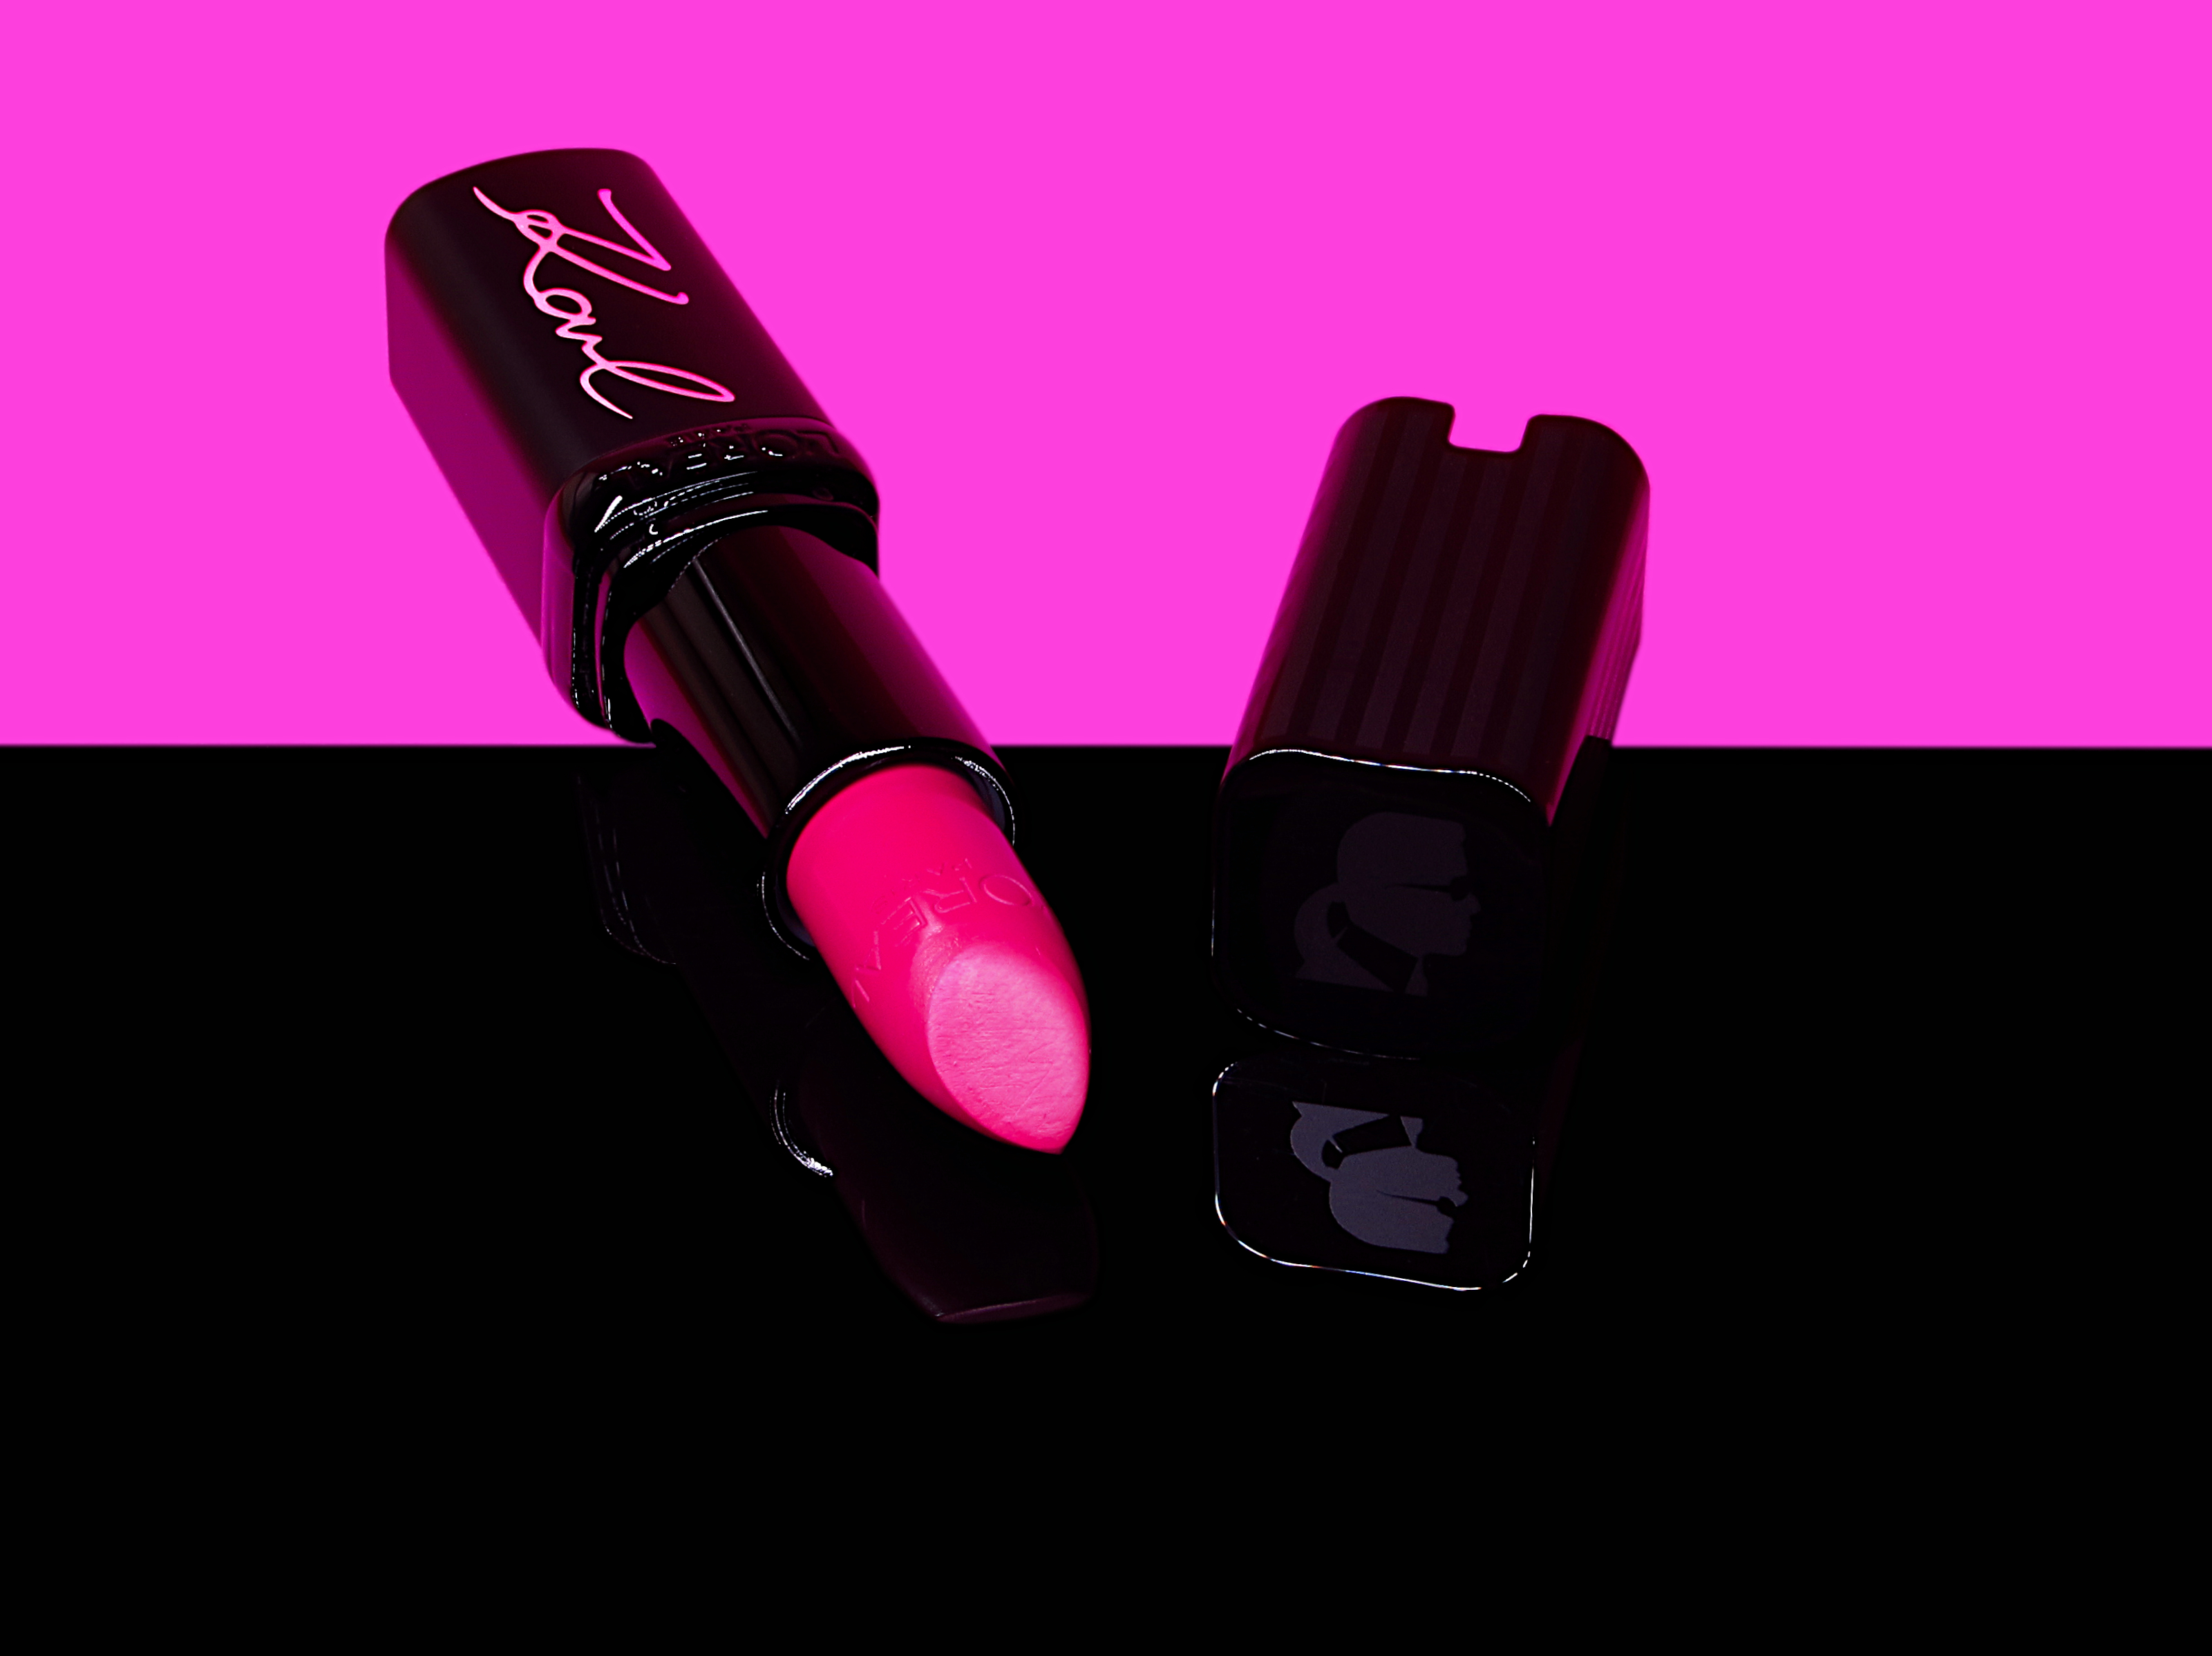 L'Oréal Paris x Karl Lagerfeld Limited Edition Collection in IroniK on a pink and black background.